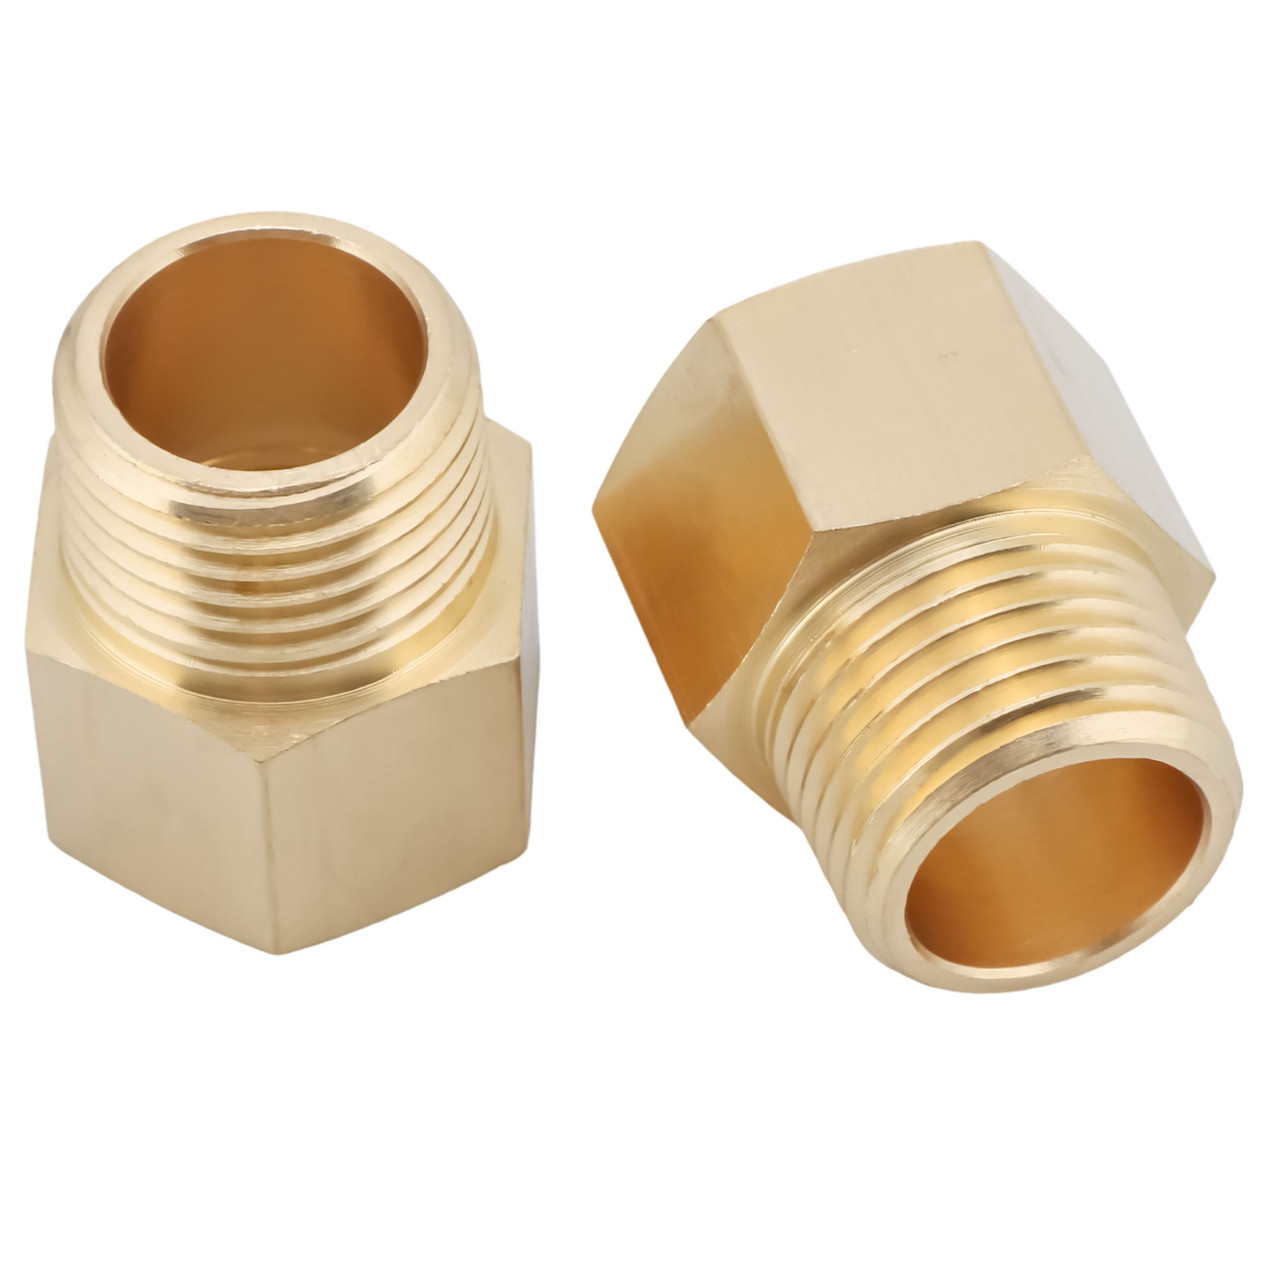 Ice Maker Water Line Brass Tube Fitting, 3/8 Male x 1/4